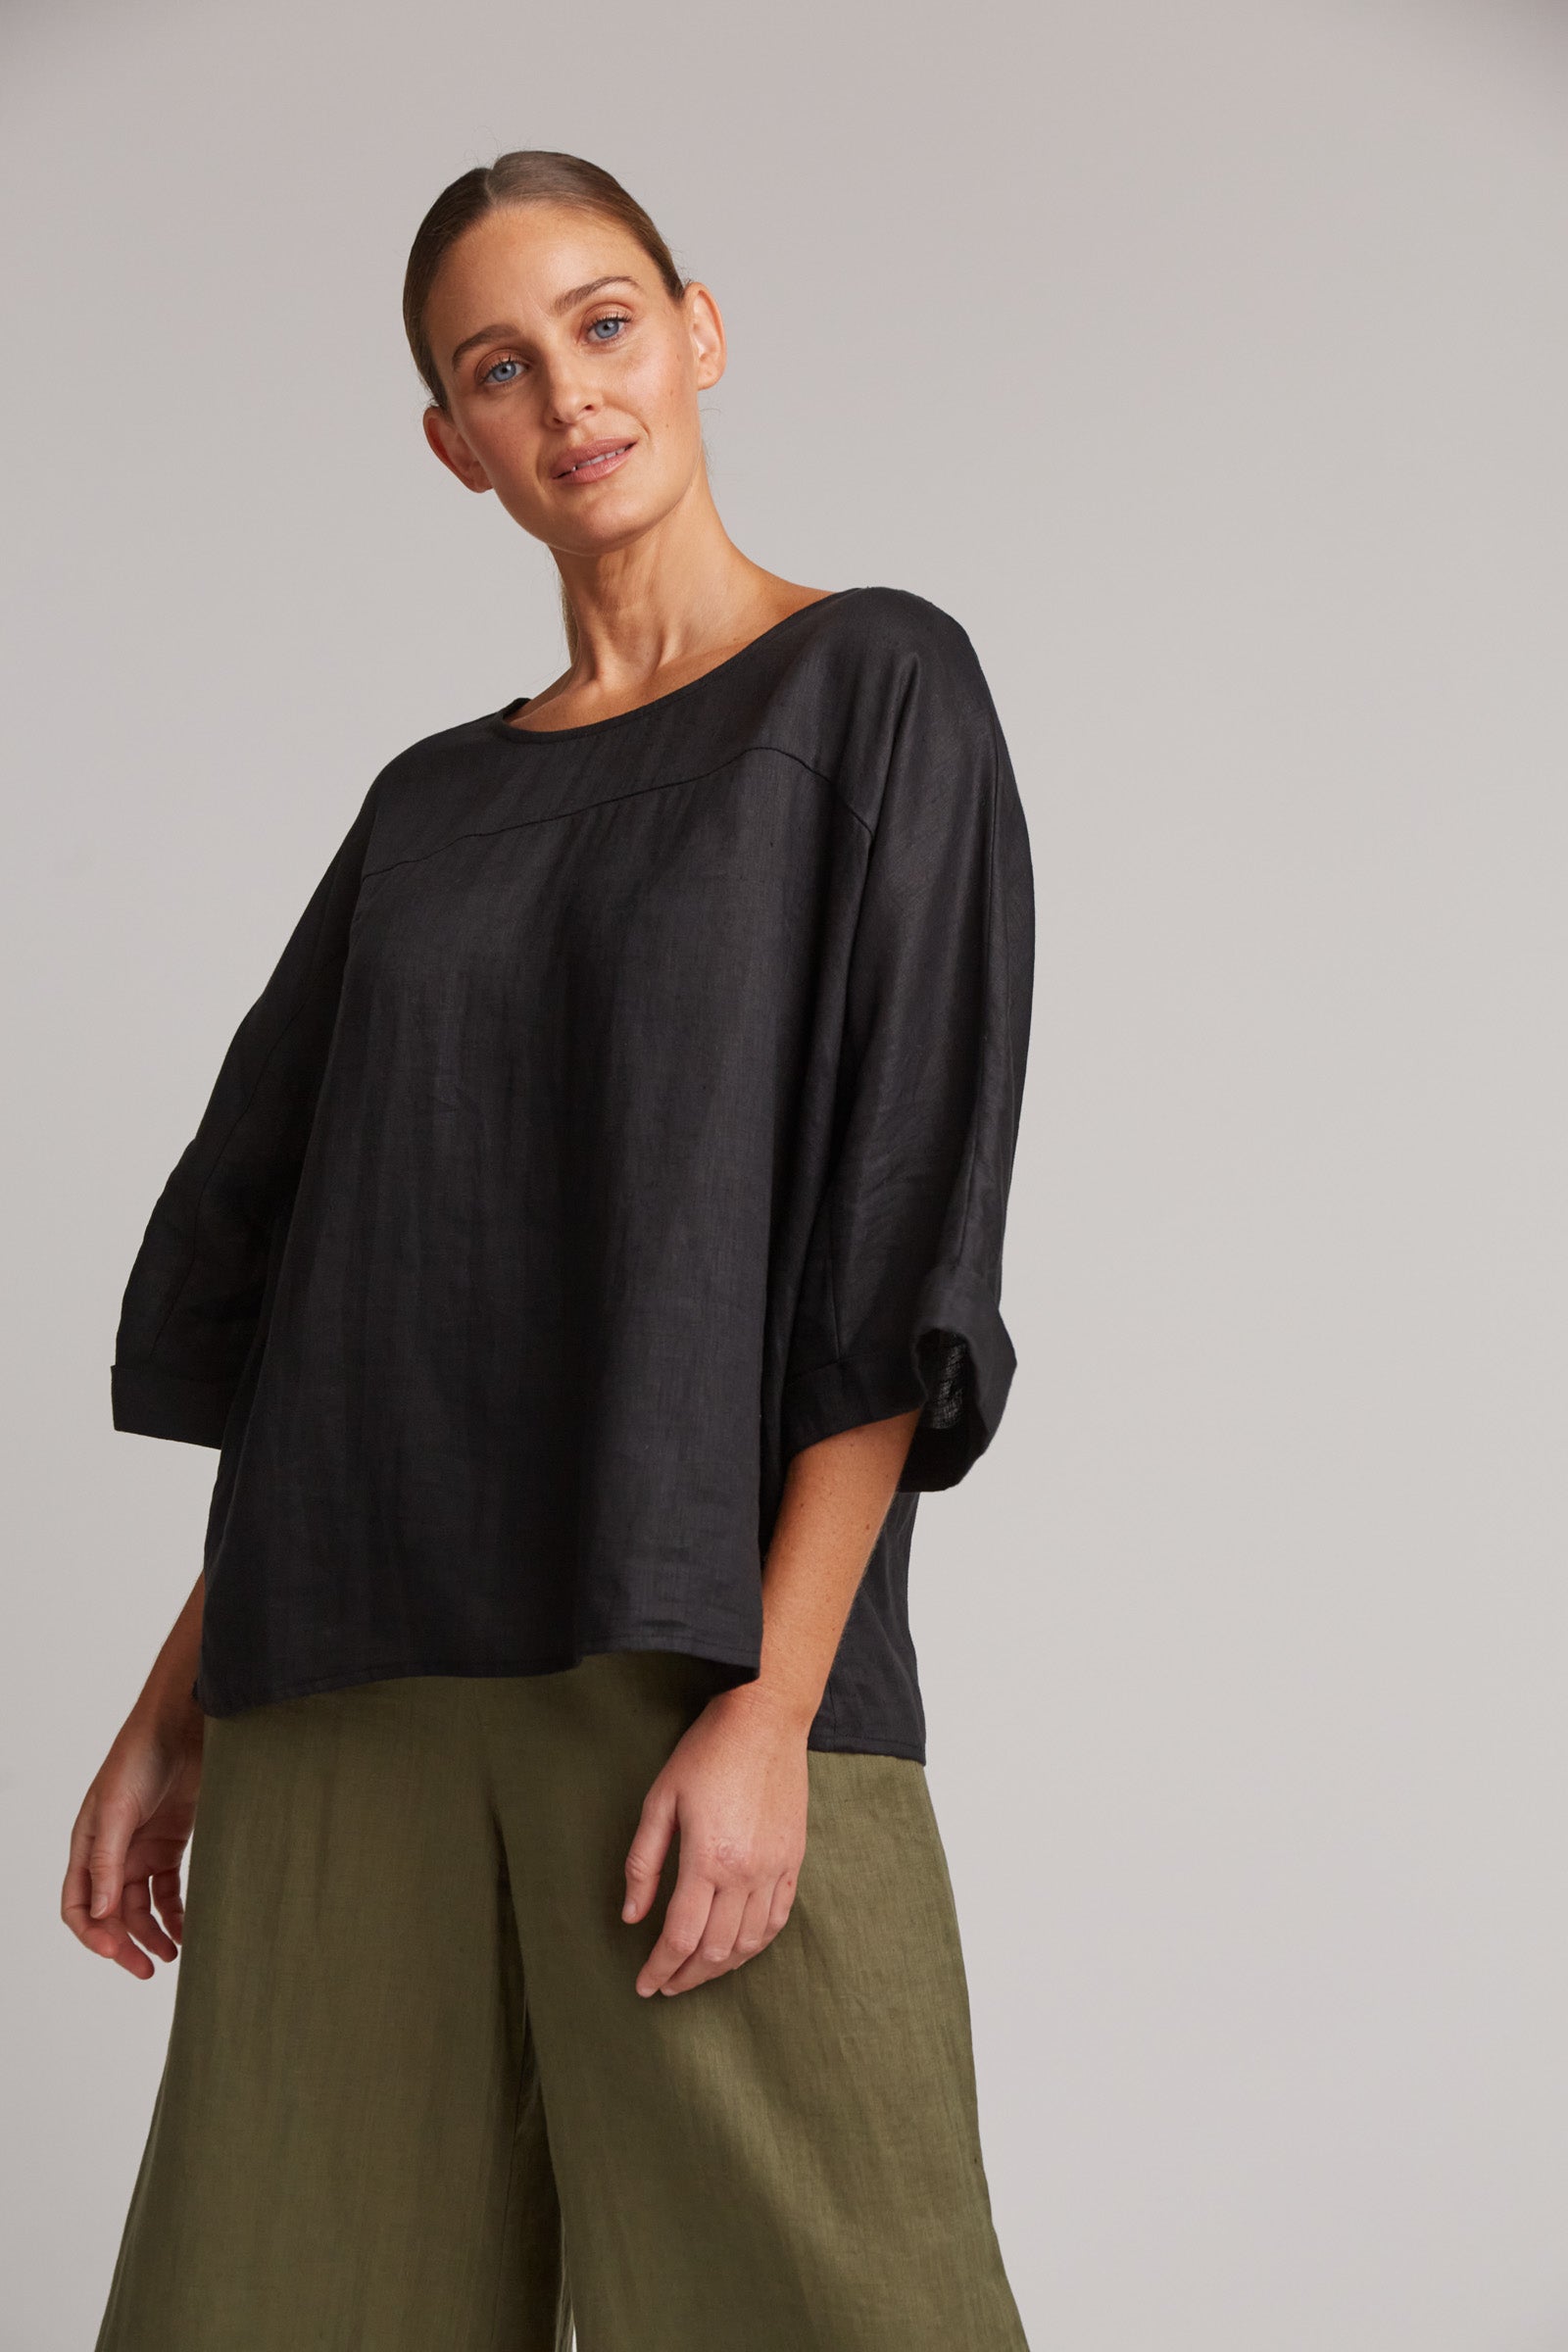 Studio Relaxed Top - Ebony - eb&ive Clothing - Top 3/4 Sleeve Linen